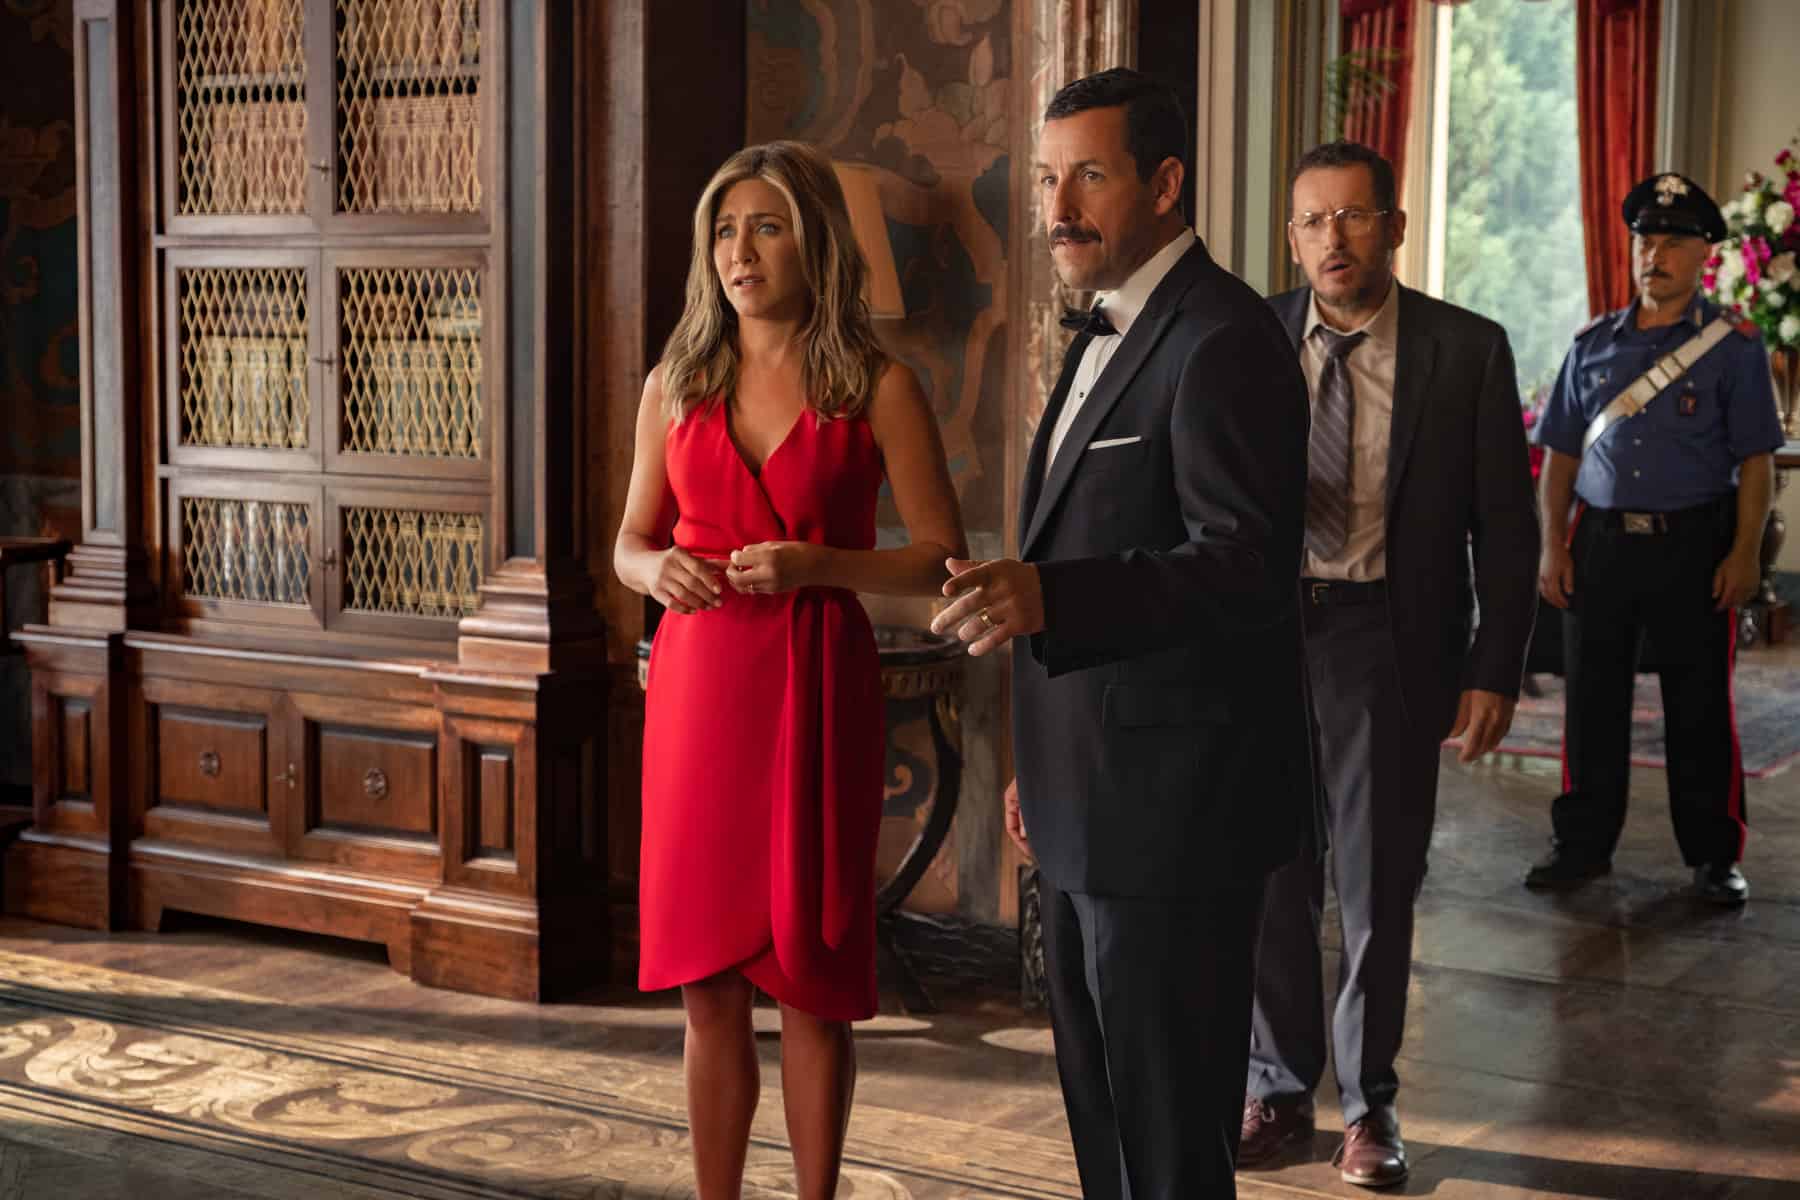 Jennifer Aniston, Adam Sandler, and Dany Boon in this image from Netflix